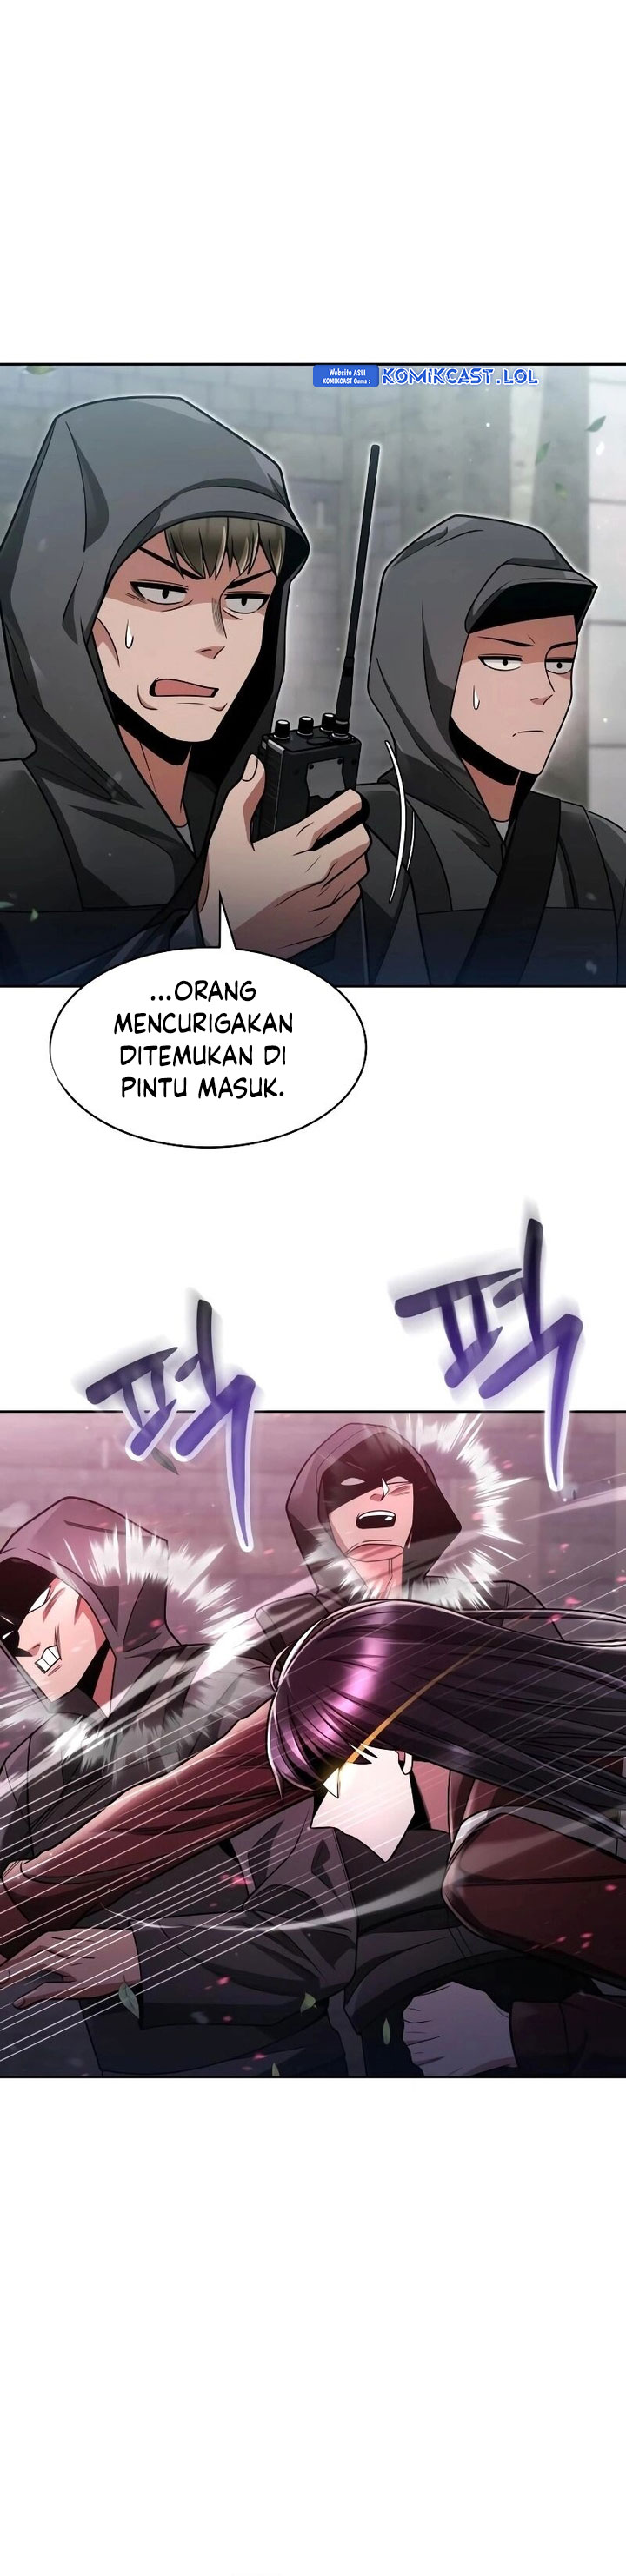 Dilarang COPAS - situs resmi www.mangacanblog.com - Komik clever cleaning life of the returned genius hunter 065 - chapter 65 66 Indonesia clever cleaning life of the returned genius hunter 065 - chapter 65 Terbaru 22|Baca Manga Komik Indonesia|Mangacan